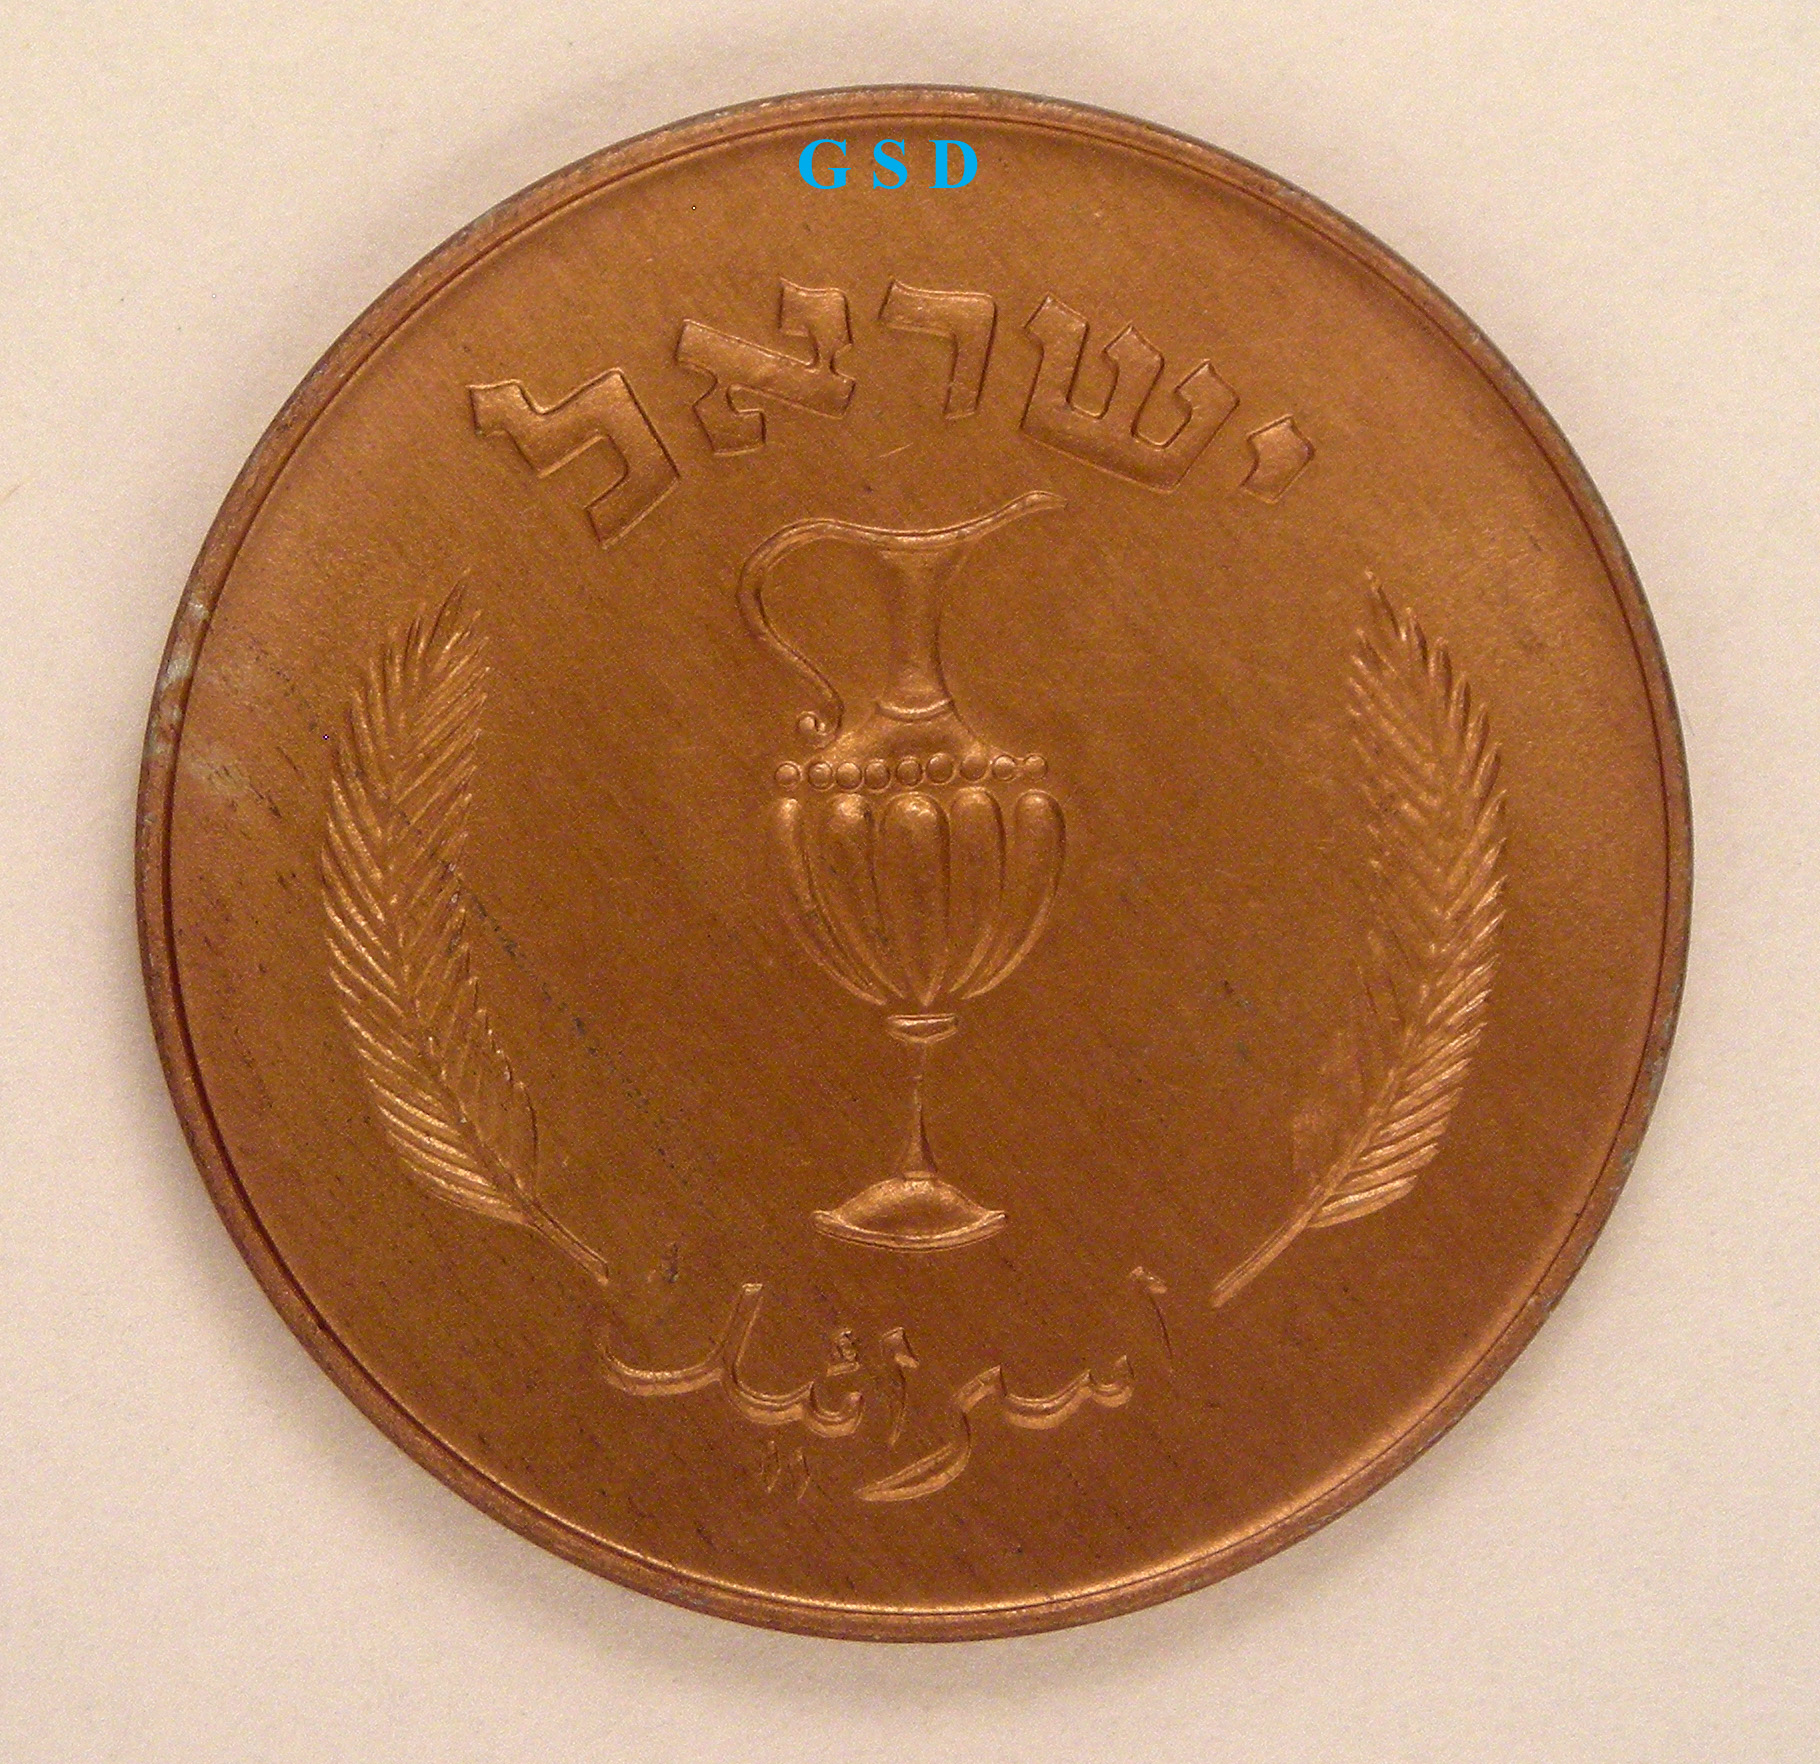 Israel_Copper_plated_obv.jpg